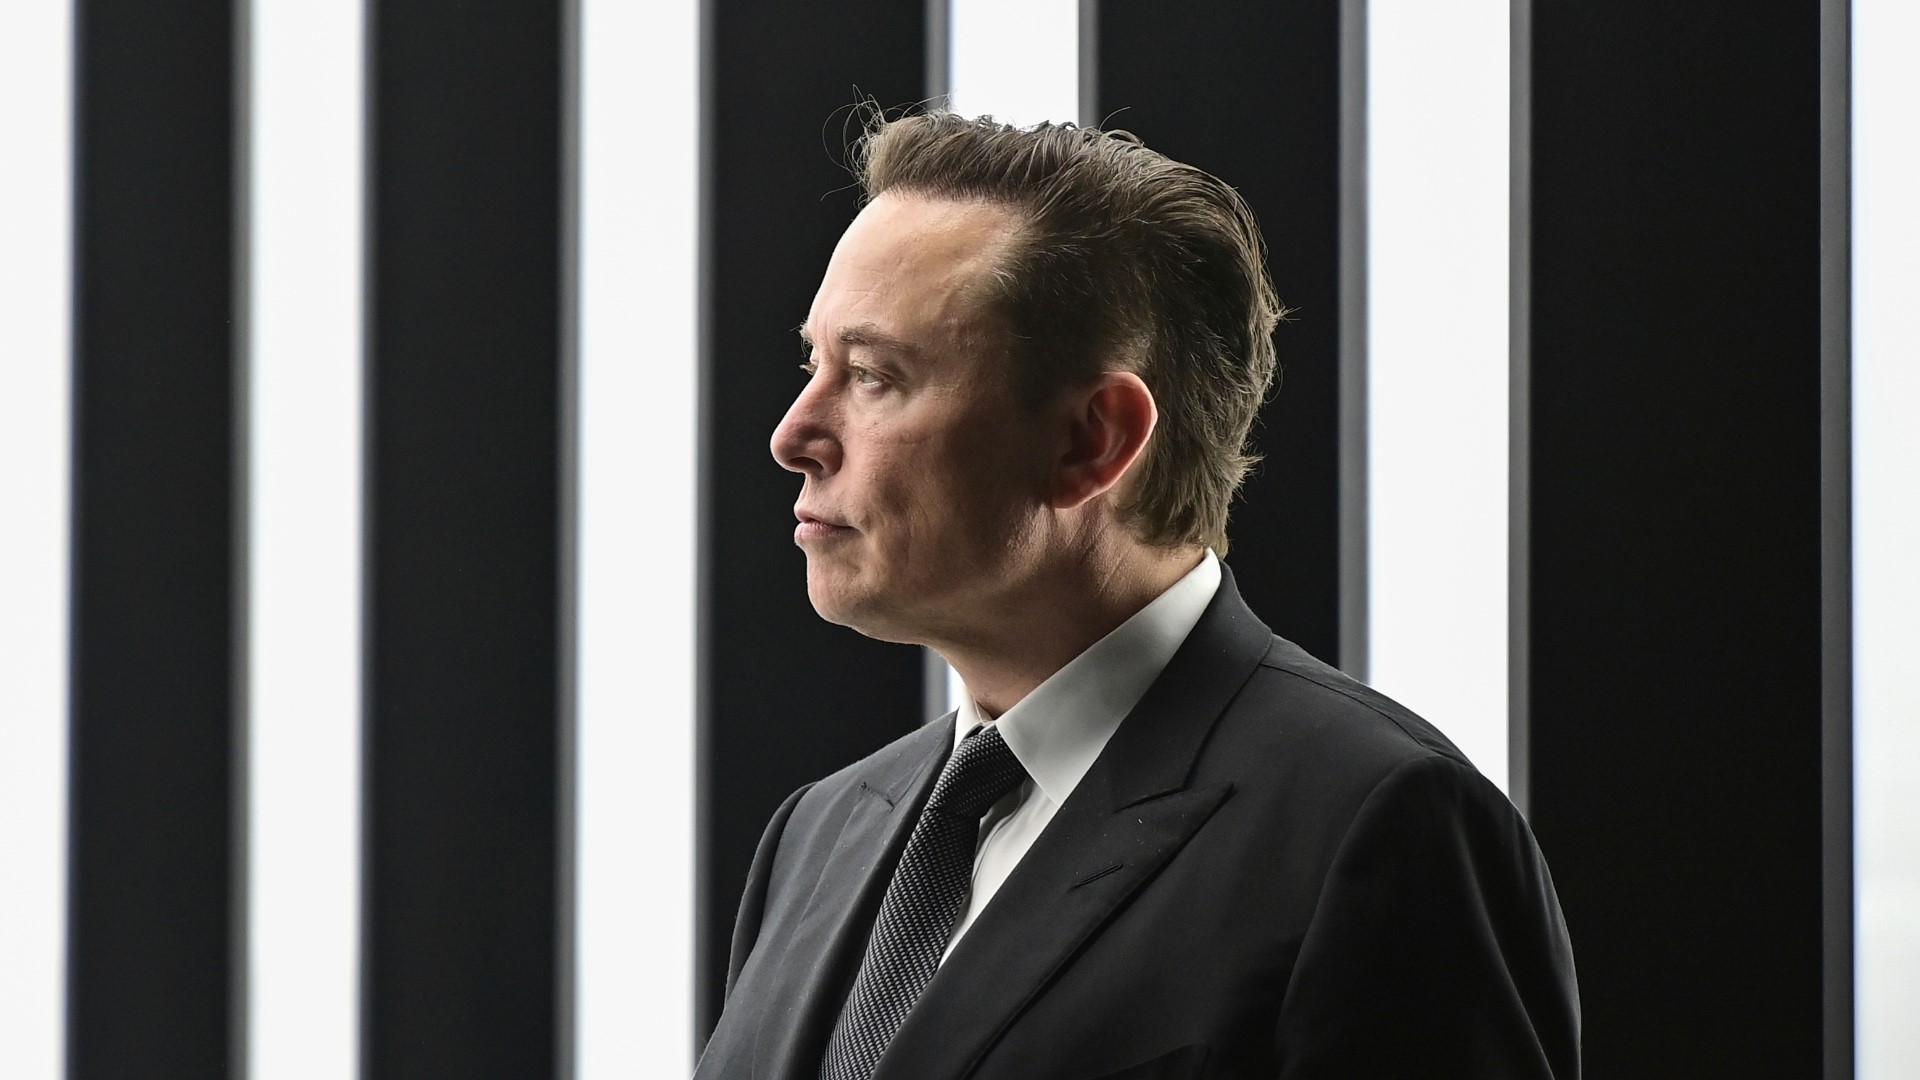 Musk has made contradictory statements about his vision for the company and shared few concrete plans for how he will run it.